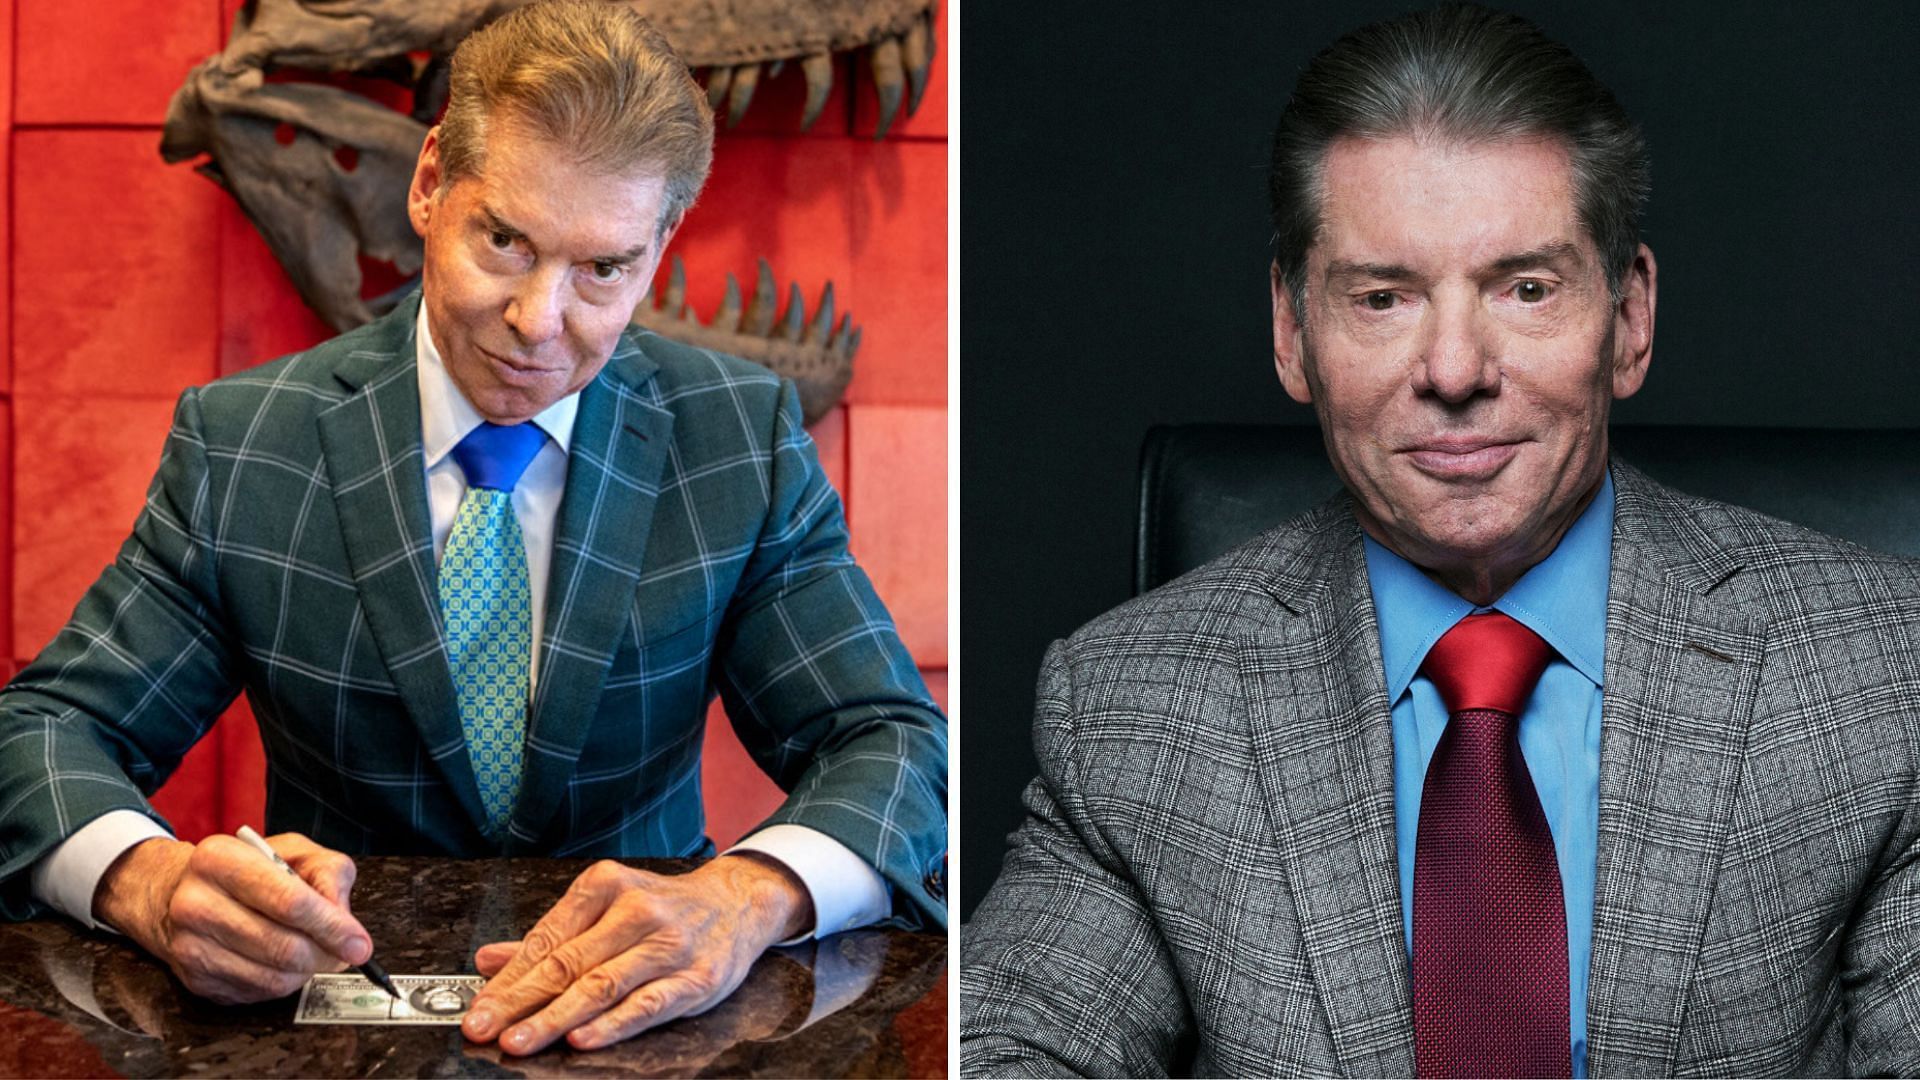 Former WWE CEO Vince McMahon resigned from the company in July